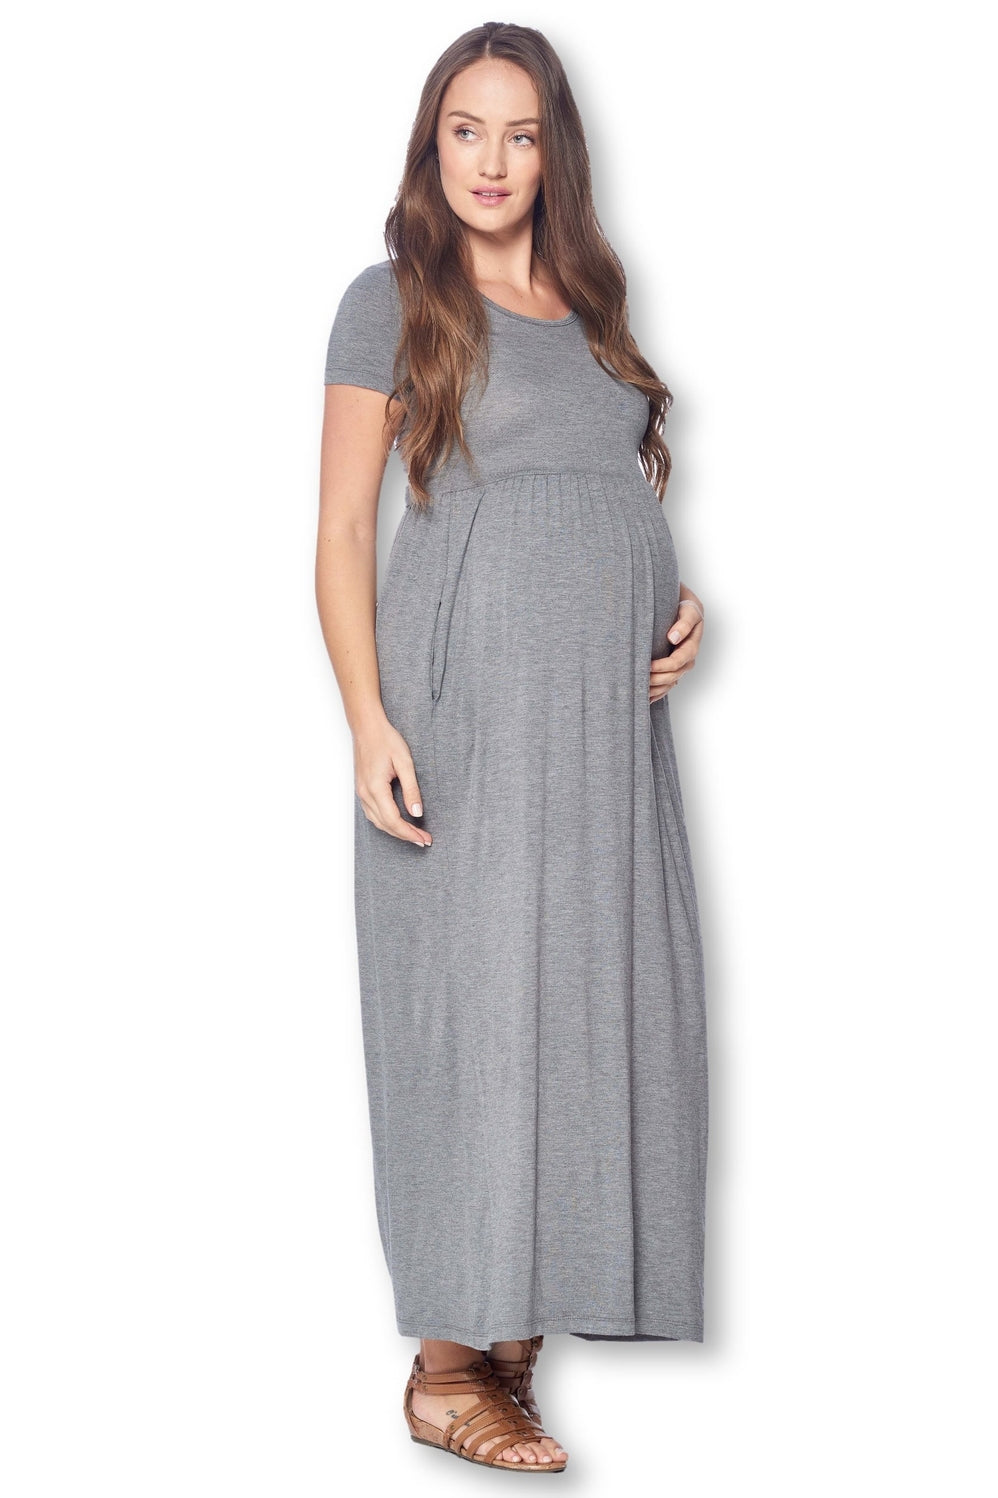 Made in USA - Charcoal Short Sleeve Loose Maternity Dress